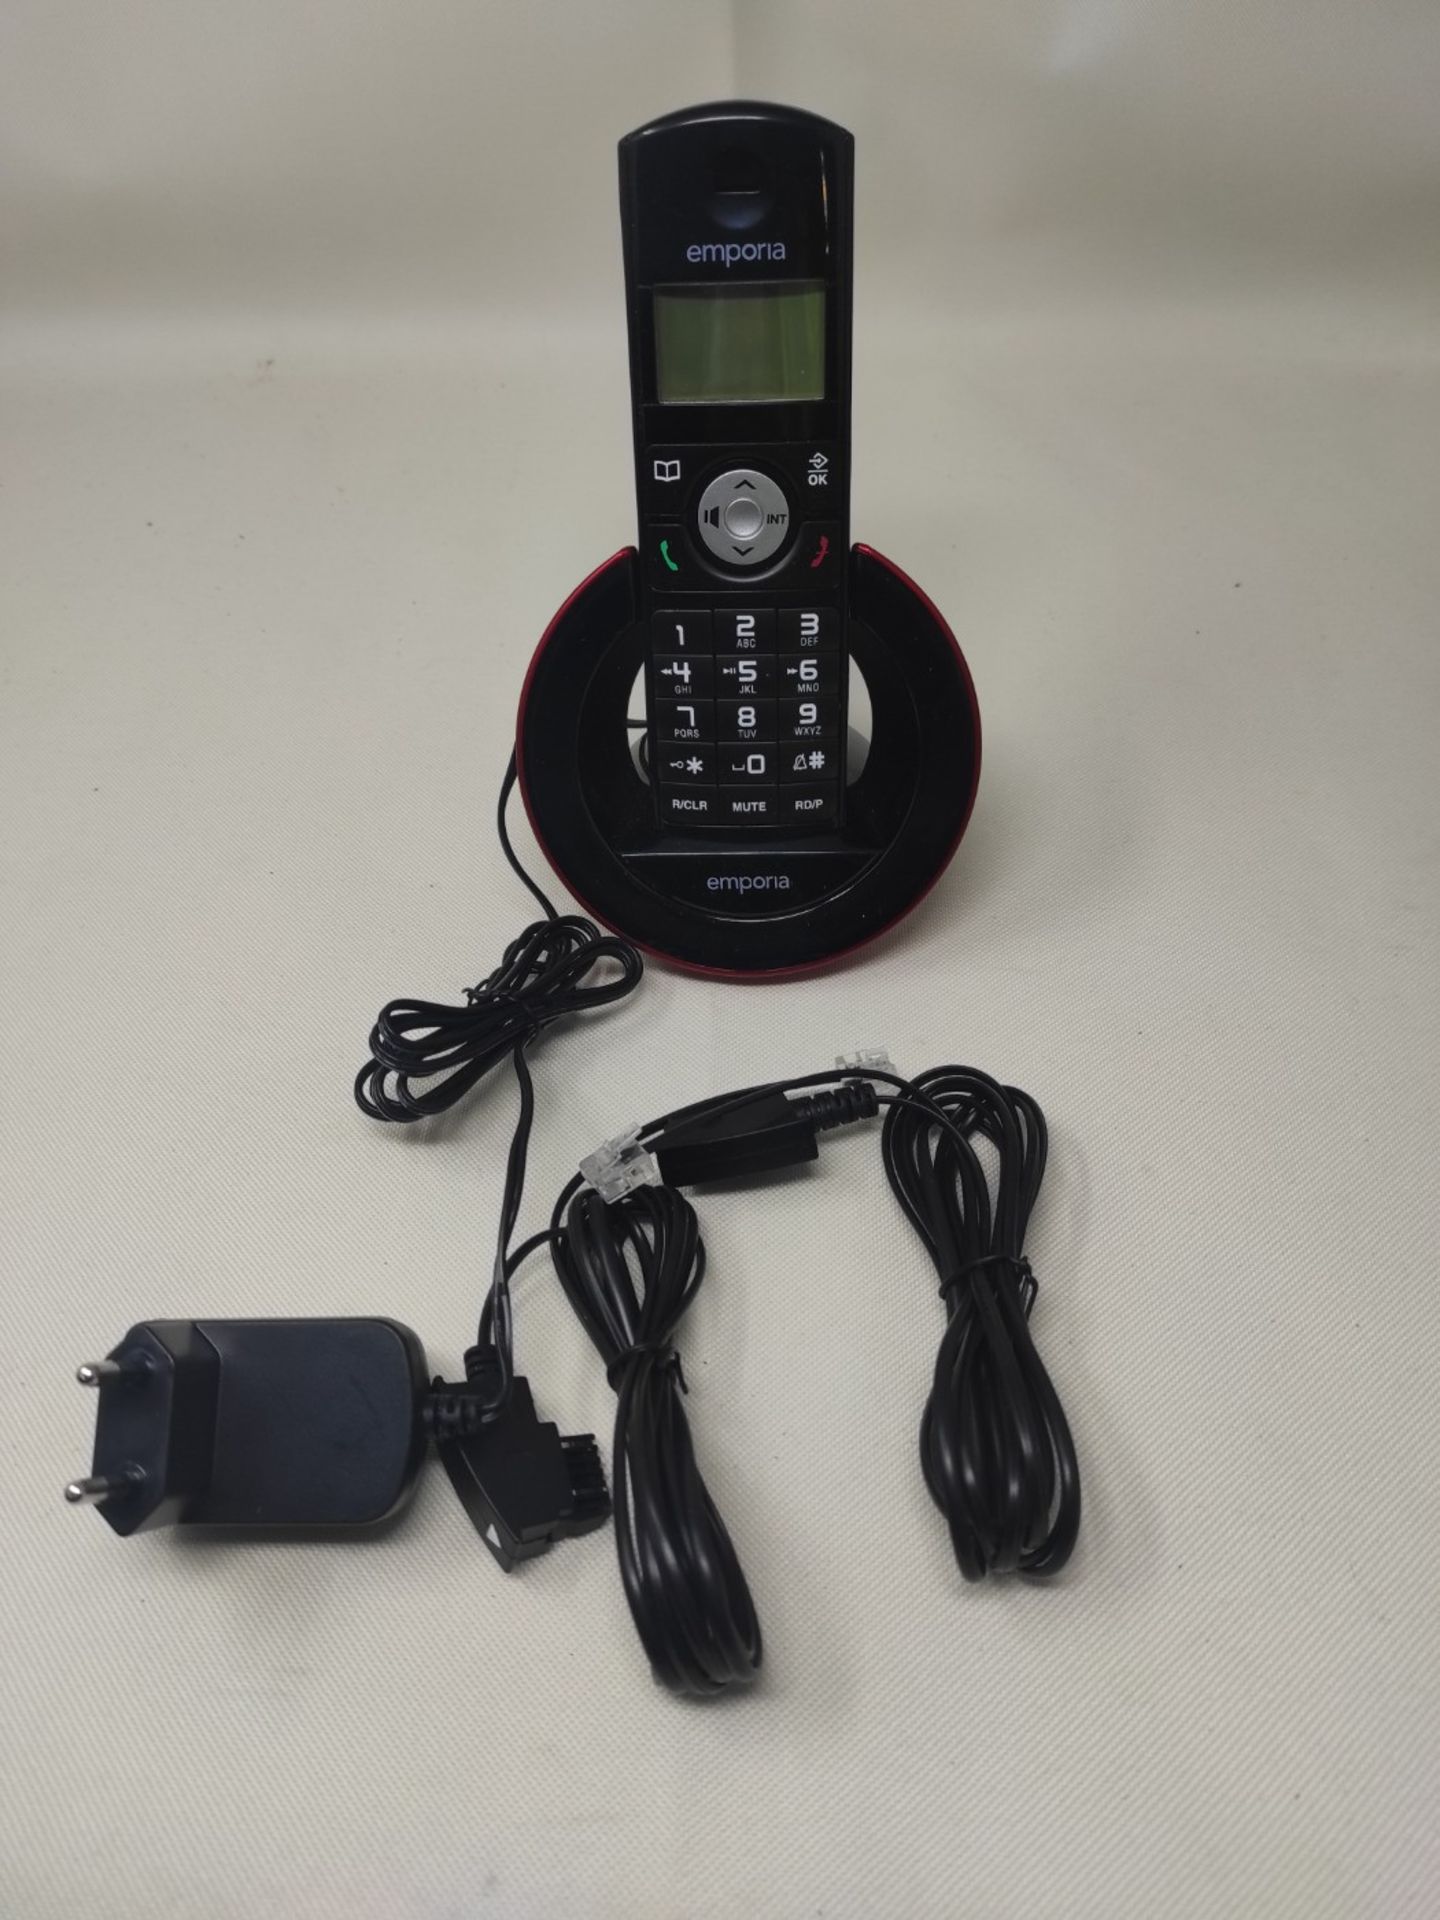 Emporia SLF19AB telephone DECT telephone Black,Red Caller ID SLF19AB, DECT telephone, - Image 2 of 2